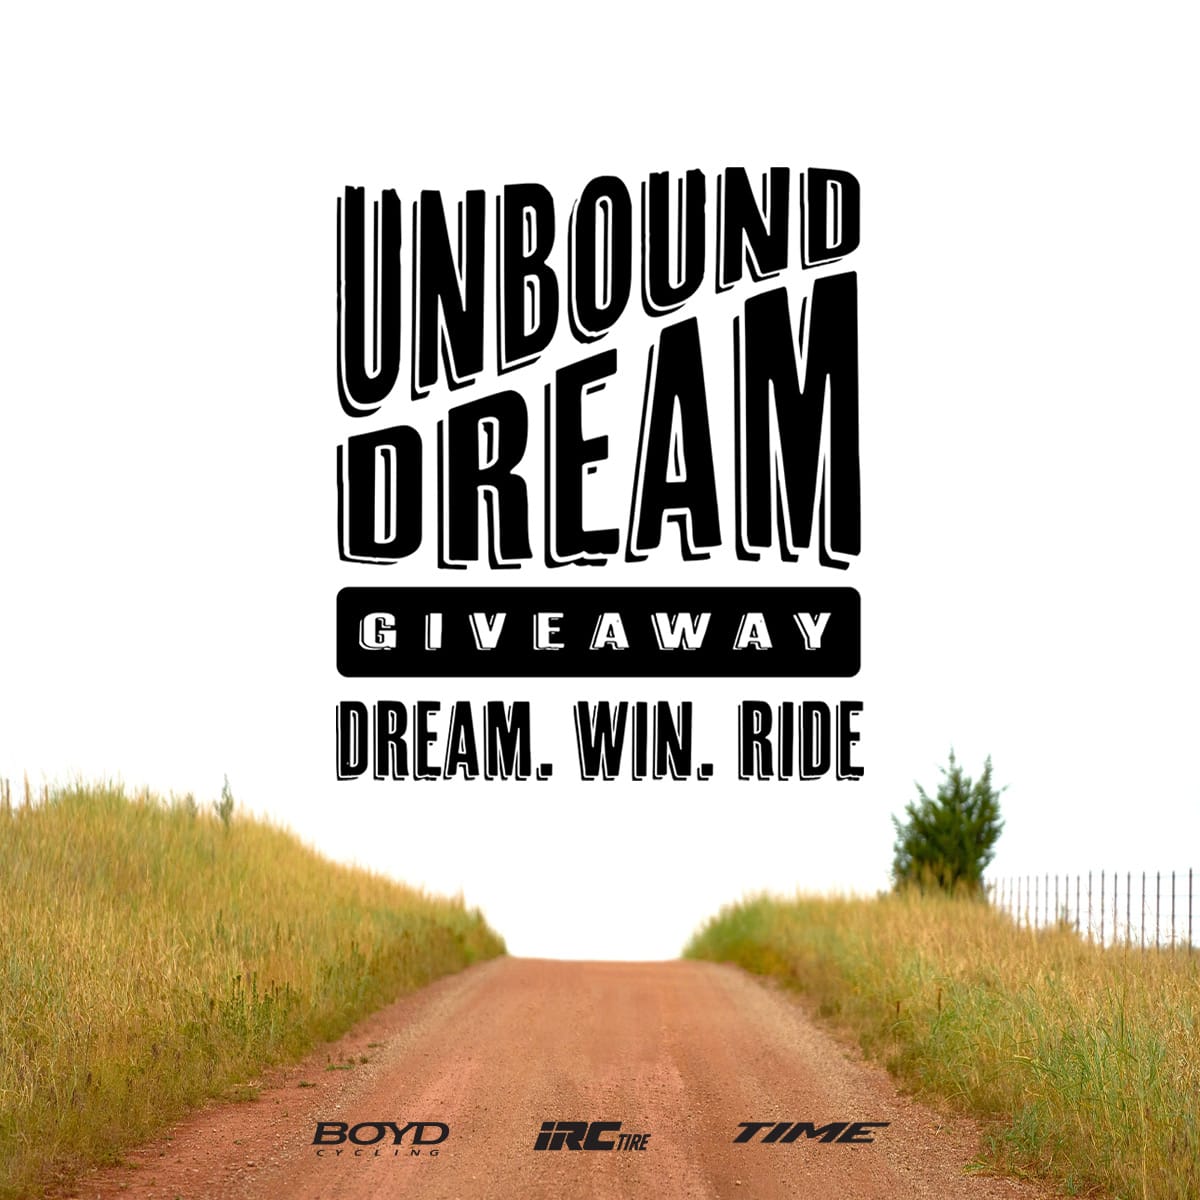 Want to Race UNBOUND? Check out the Dream Giveaway from Boyd Cycling